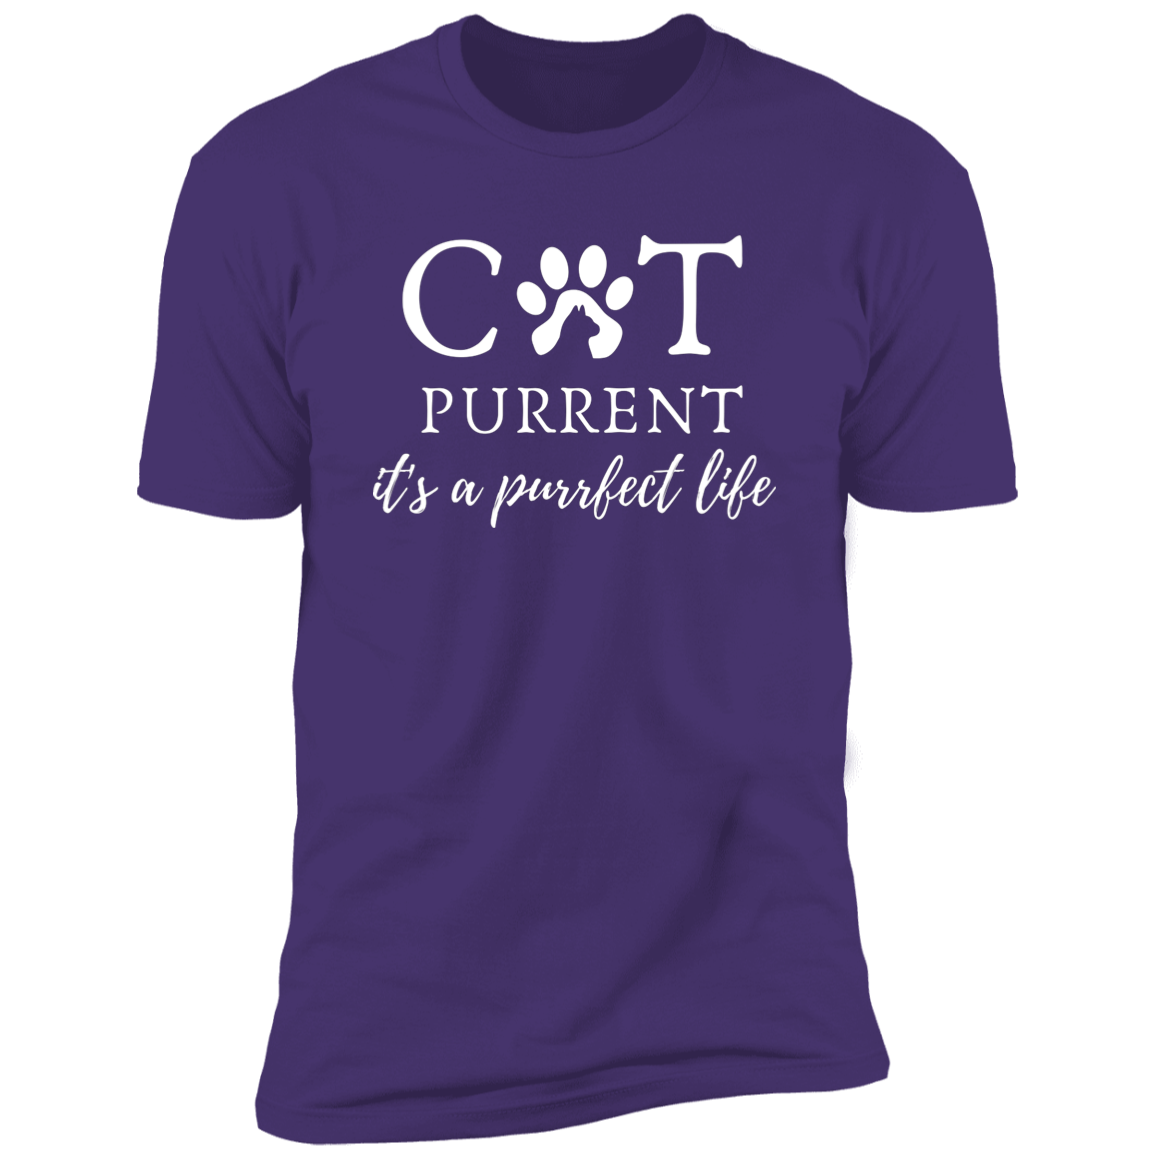 Cat Purrent It's a Purrfect Life T-shirt, Cat Parent Shirt for humans, in purple rush